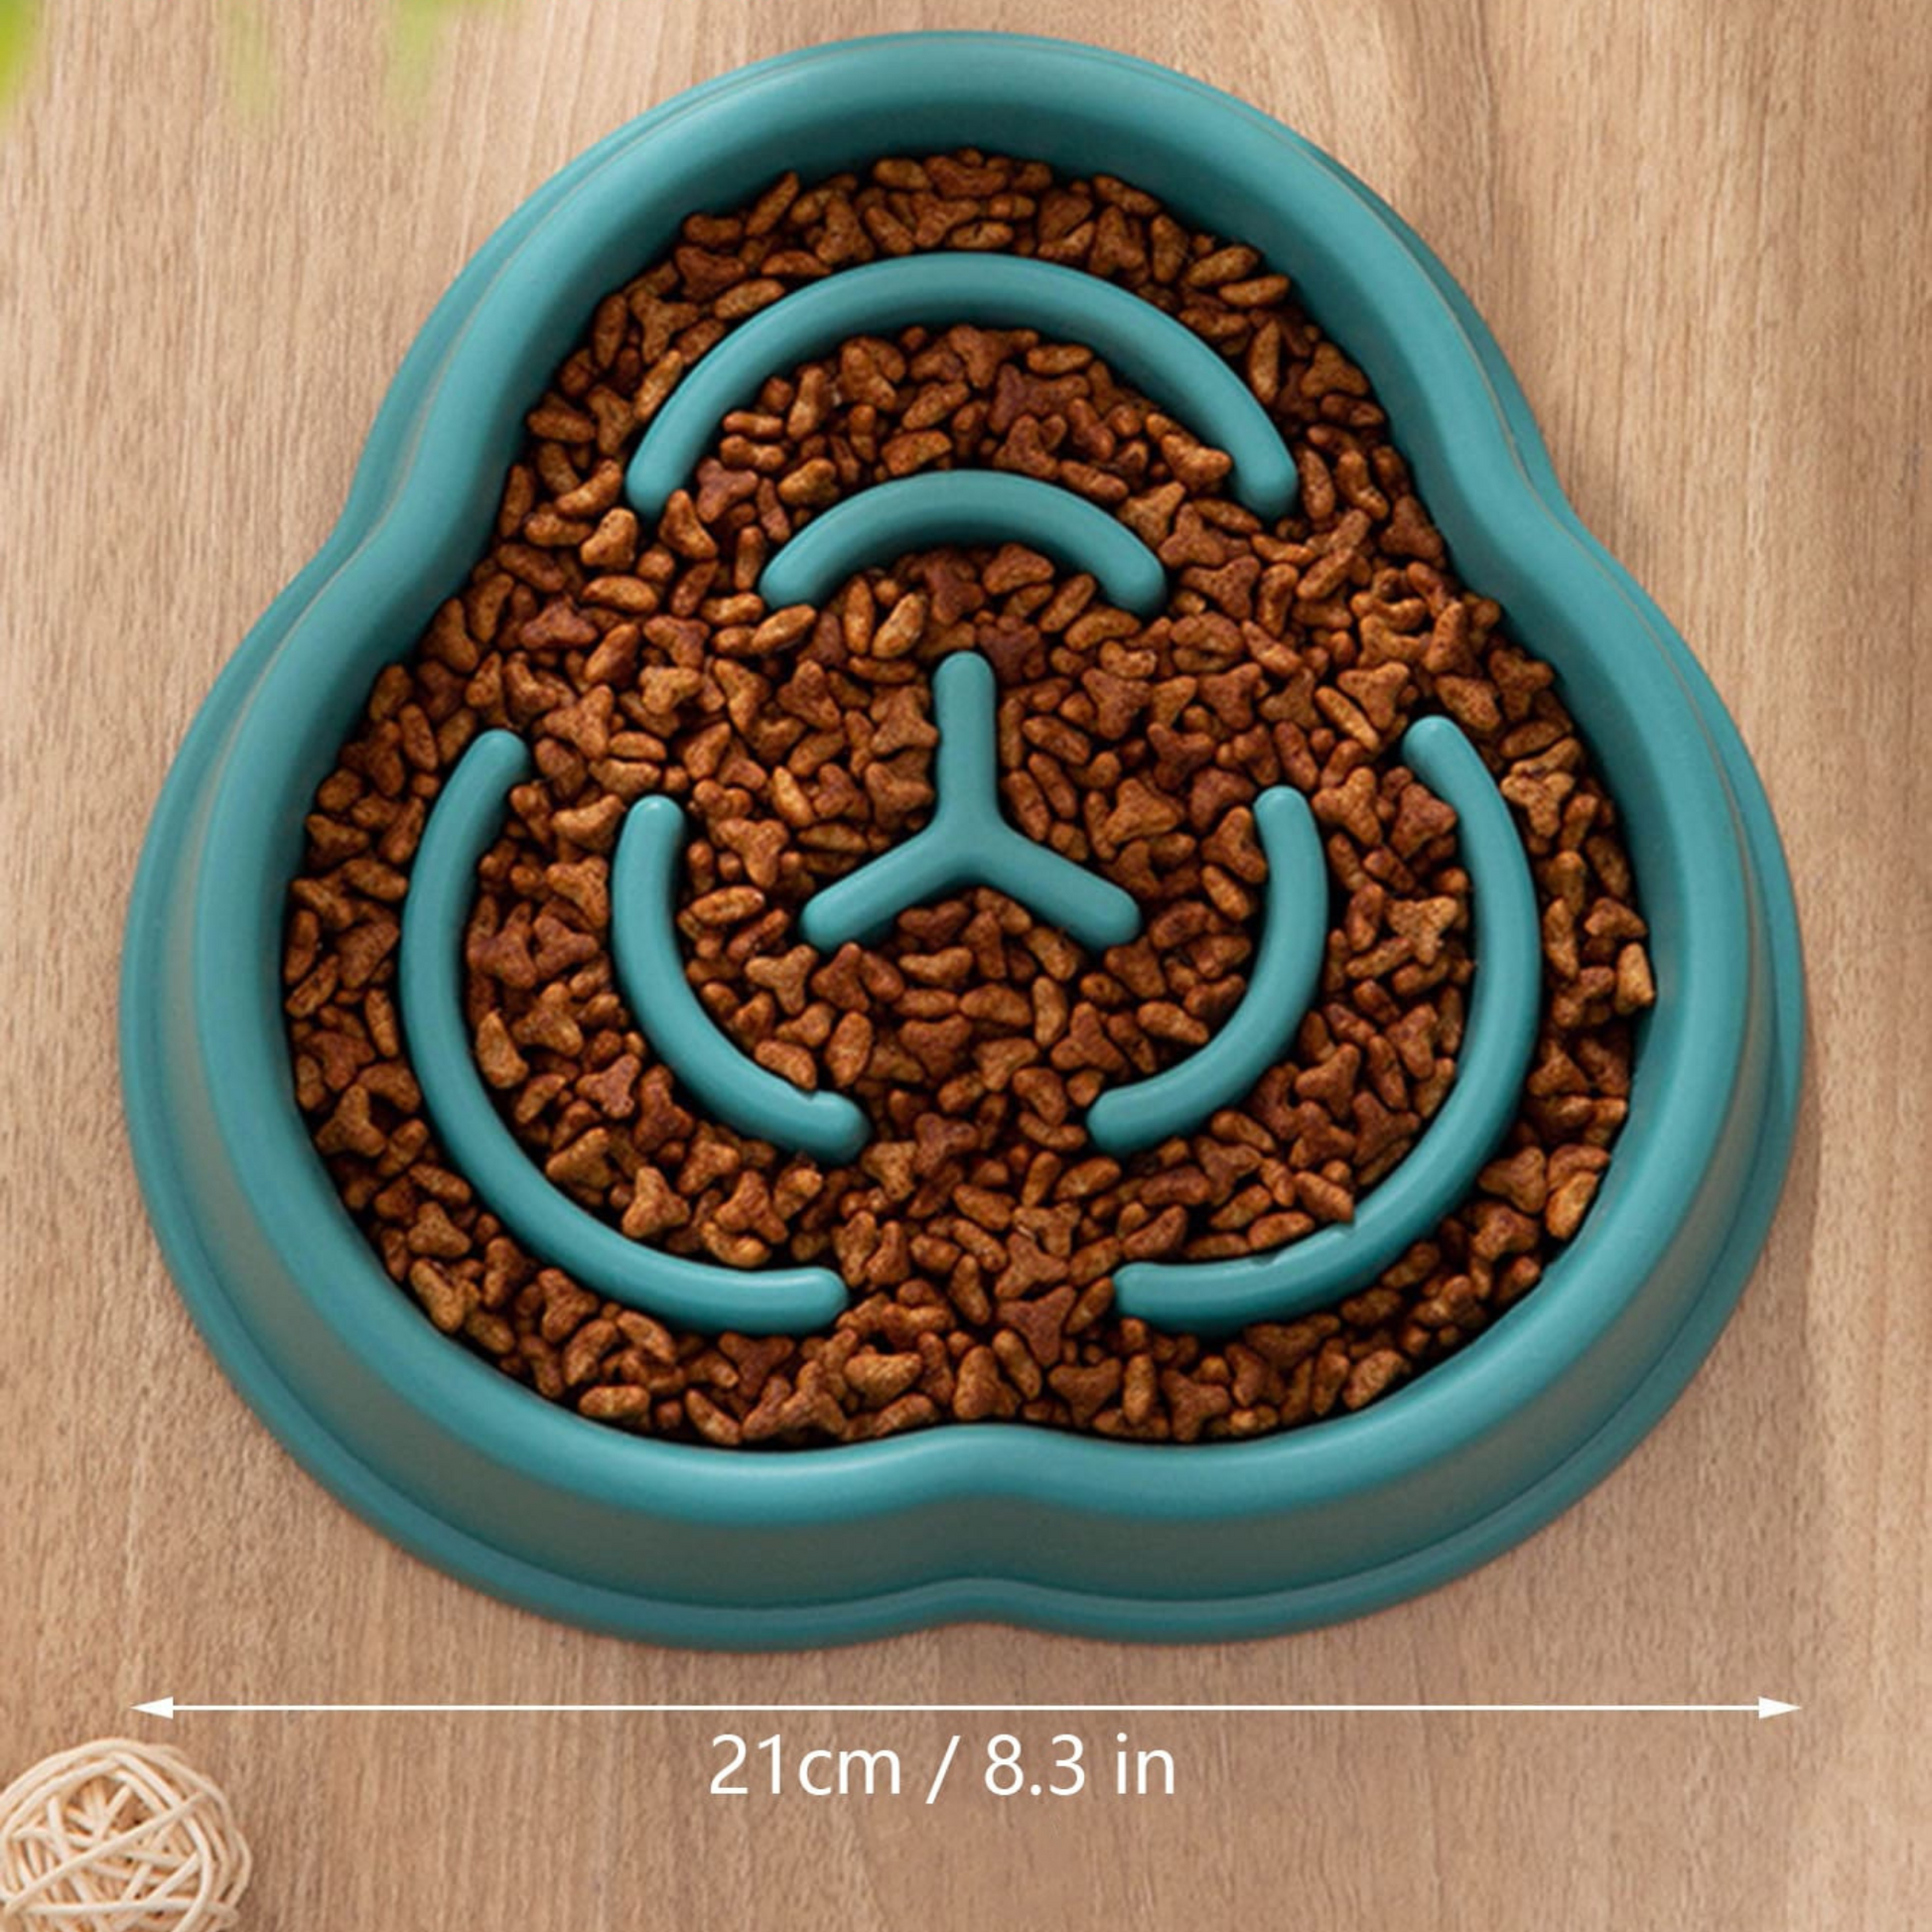 Slow-Feeder Bowl for Dogs - Promotes slow eating and aids digestion - Random Color Option.